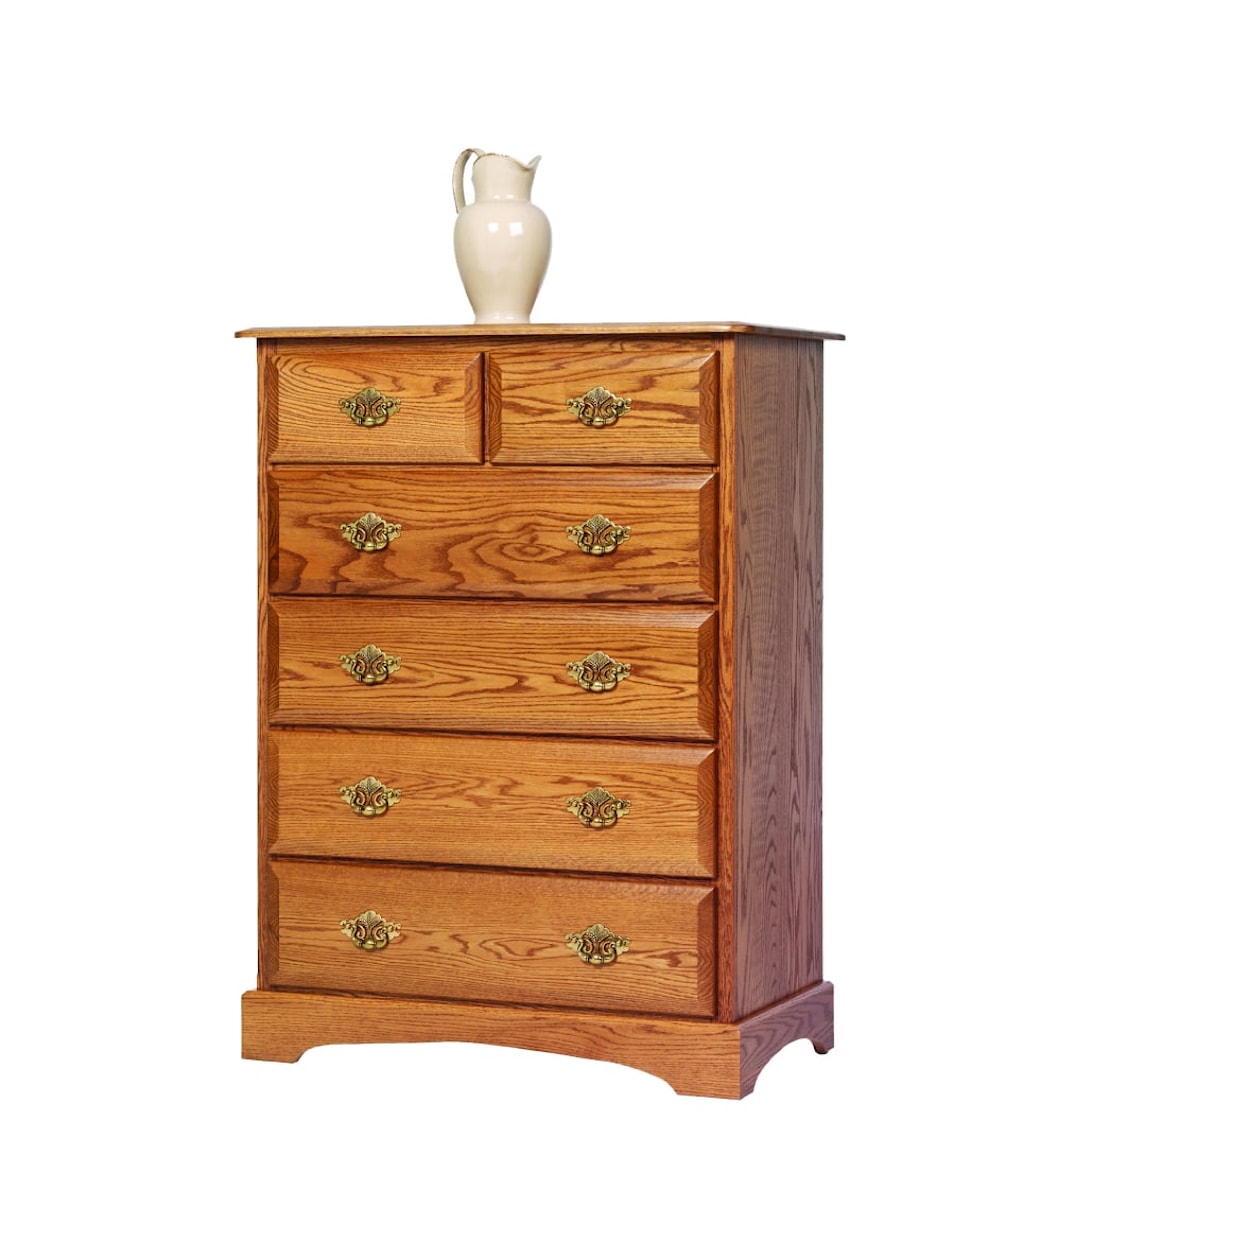 Millcraft Sierra Classic 6-Drawer Chest of Drawers